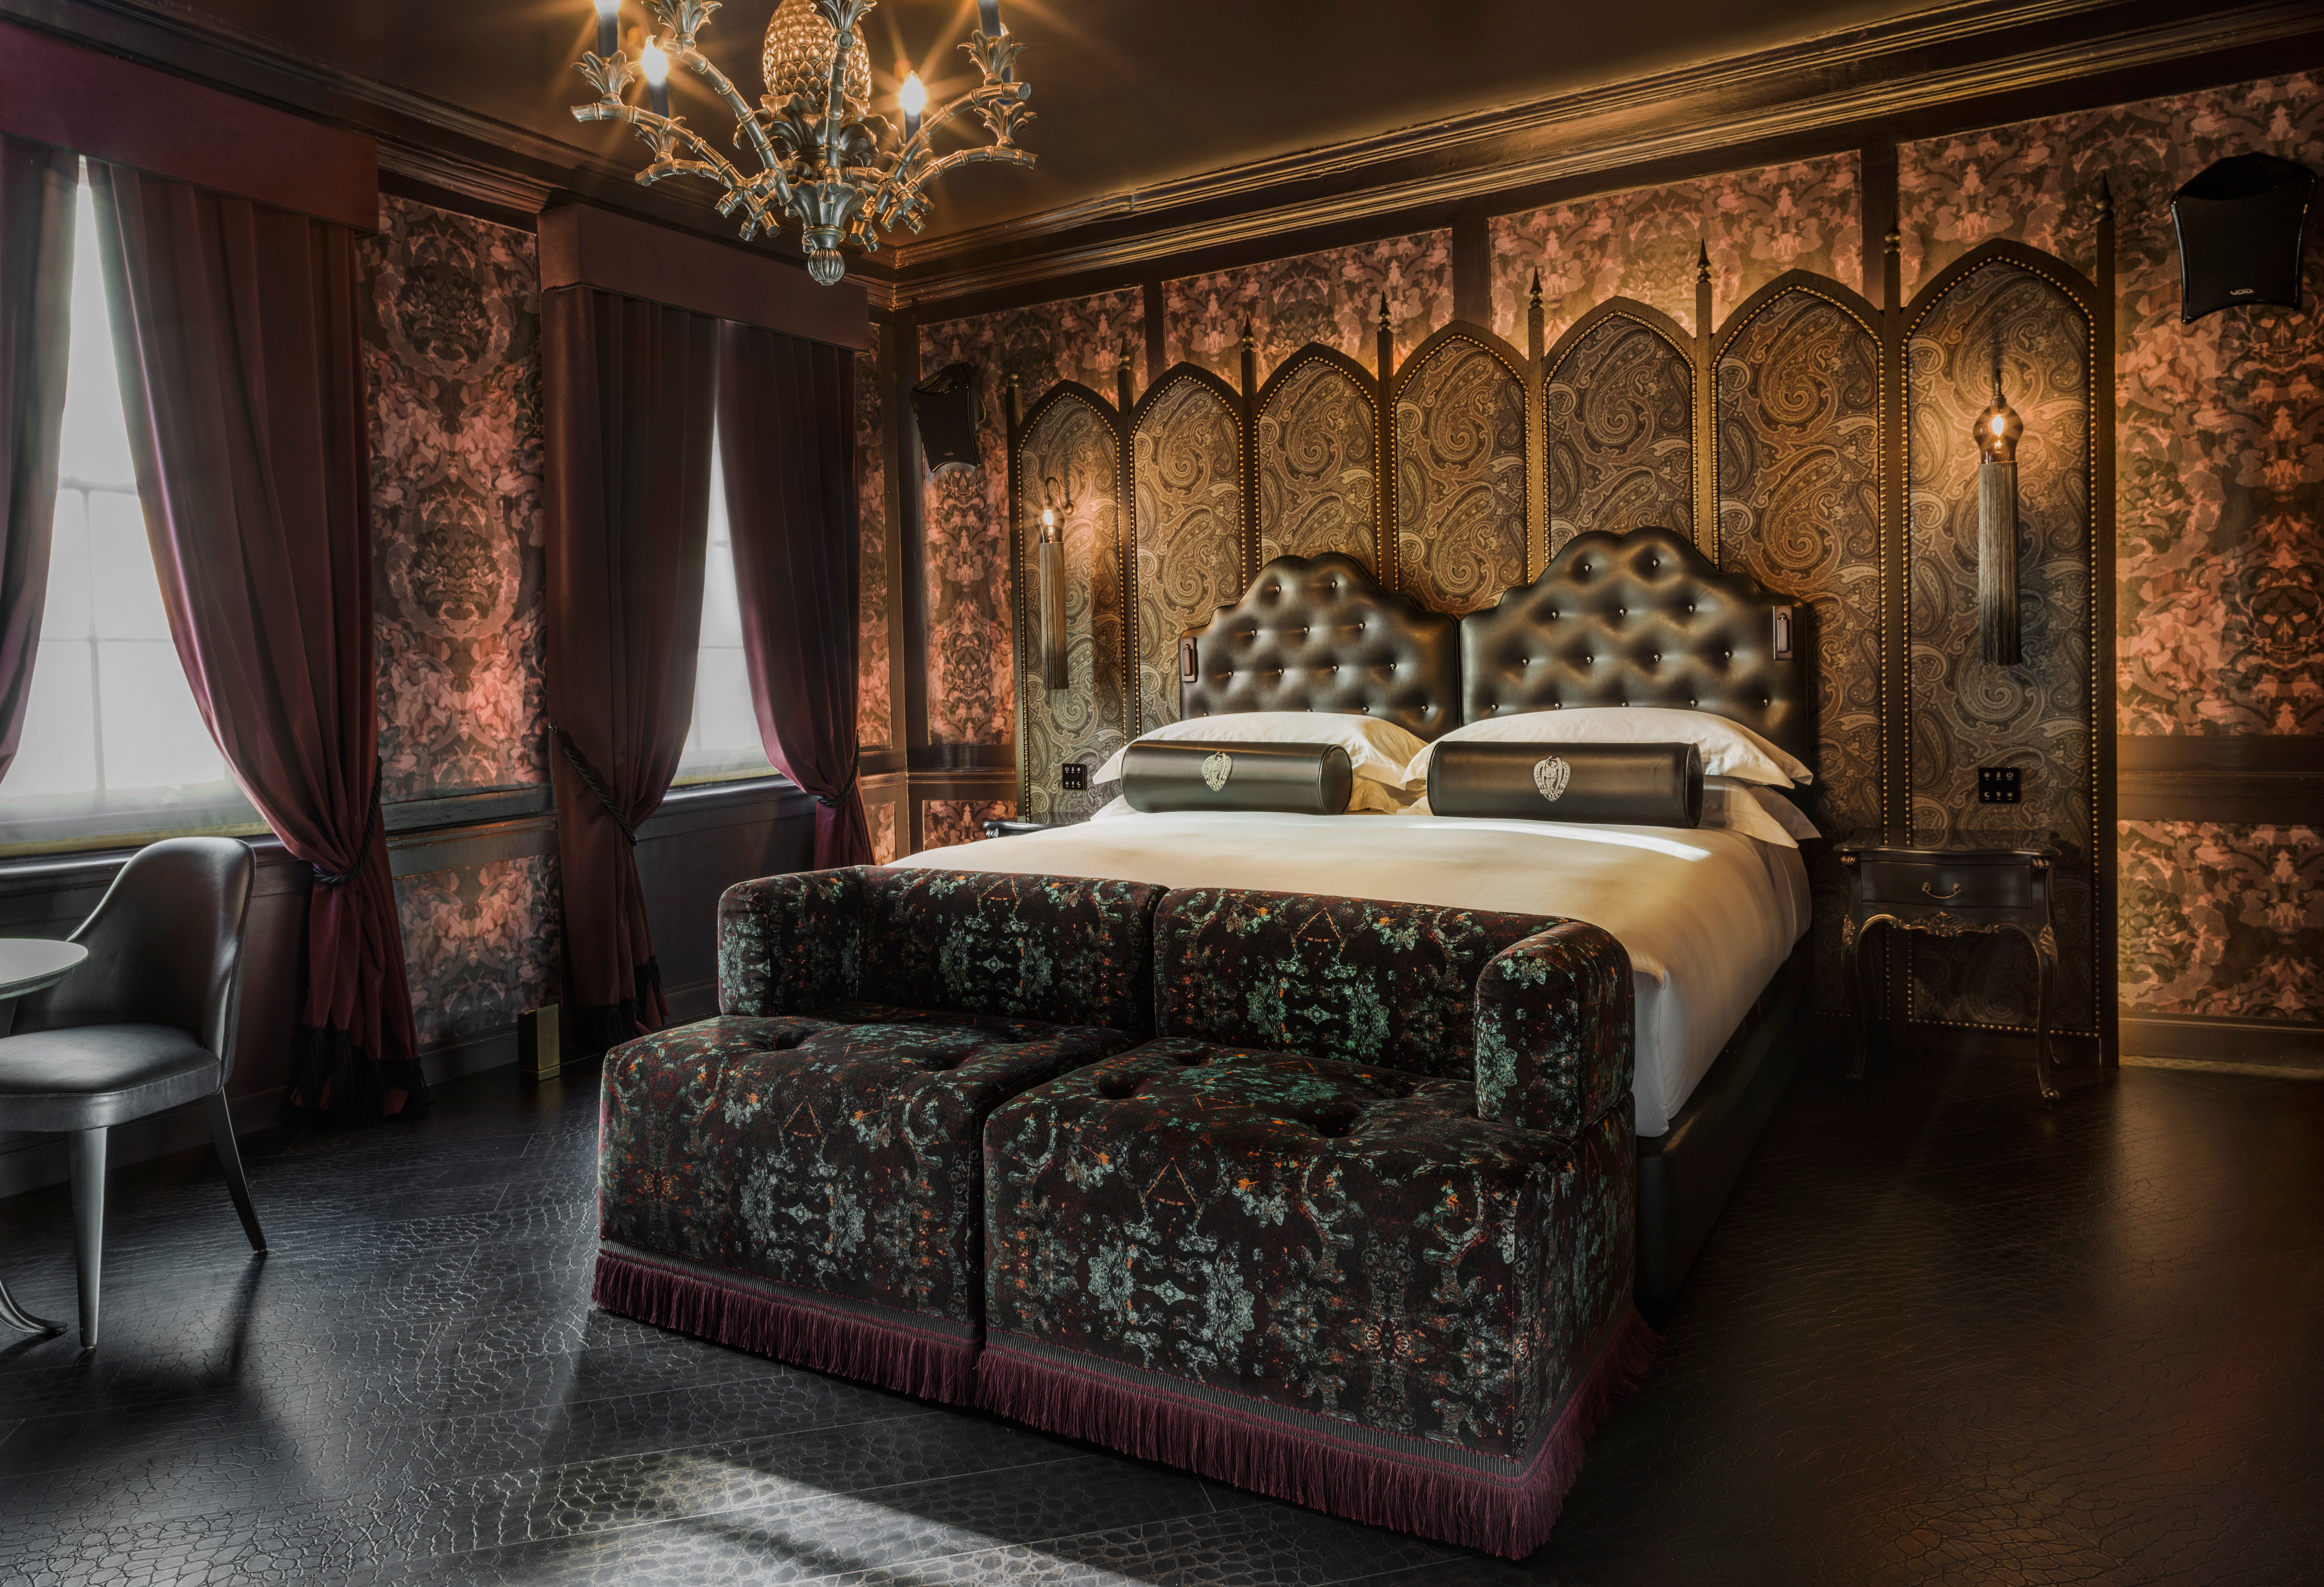 Chateau Denmark is one of London’s most exciting places to stay